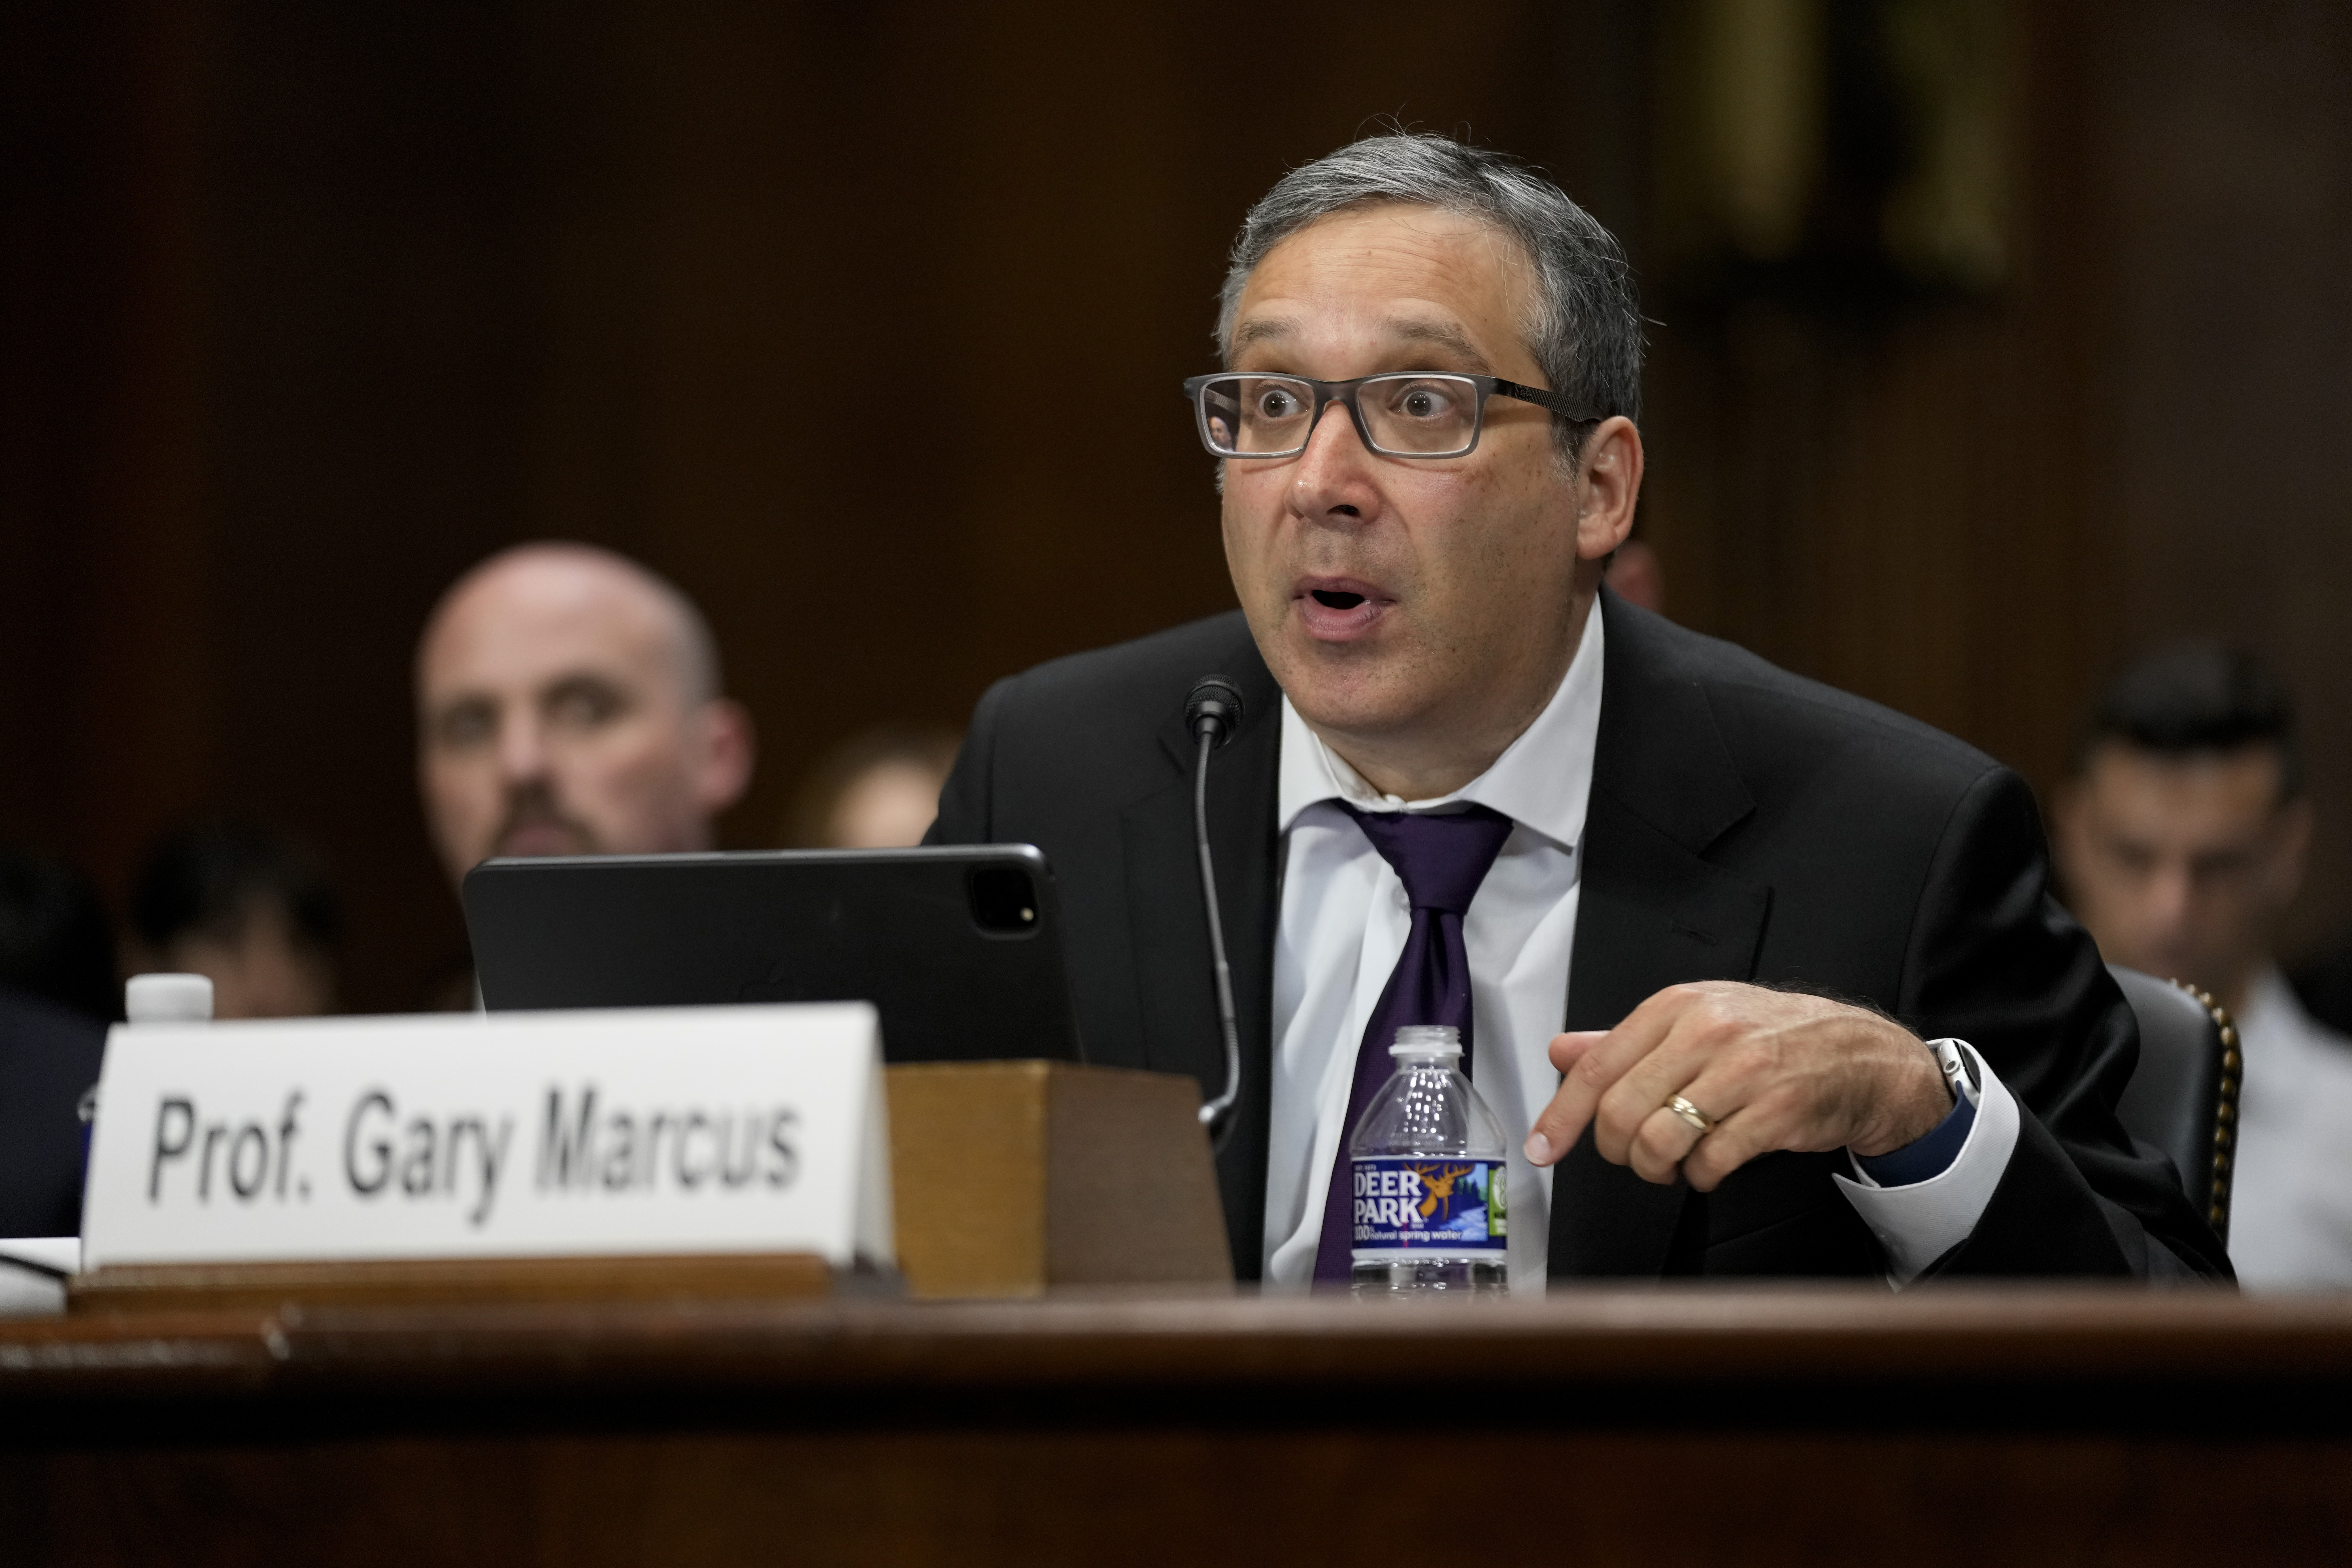 NYU Professor Emeritus Gary Marcus speaks before a Senate Judiciary Subcommittee on Privacy, Technology and the Law hearing on artificial intelligence, Tuesday, May 16, 2023, on Capitol Hill in Washington